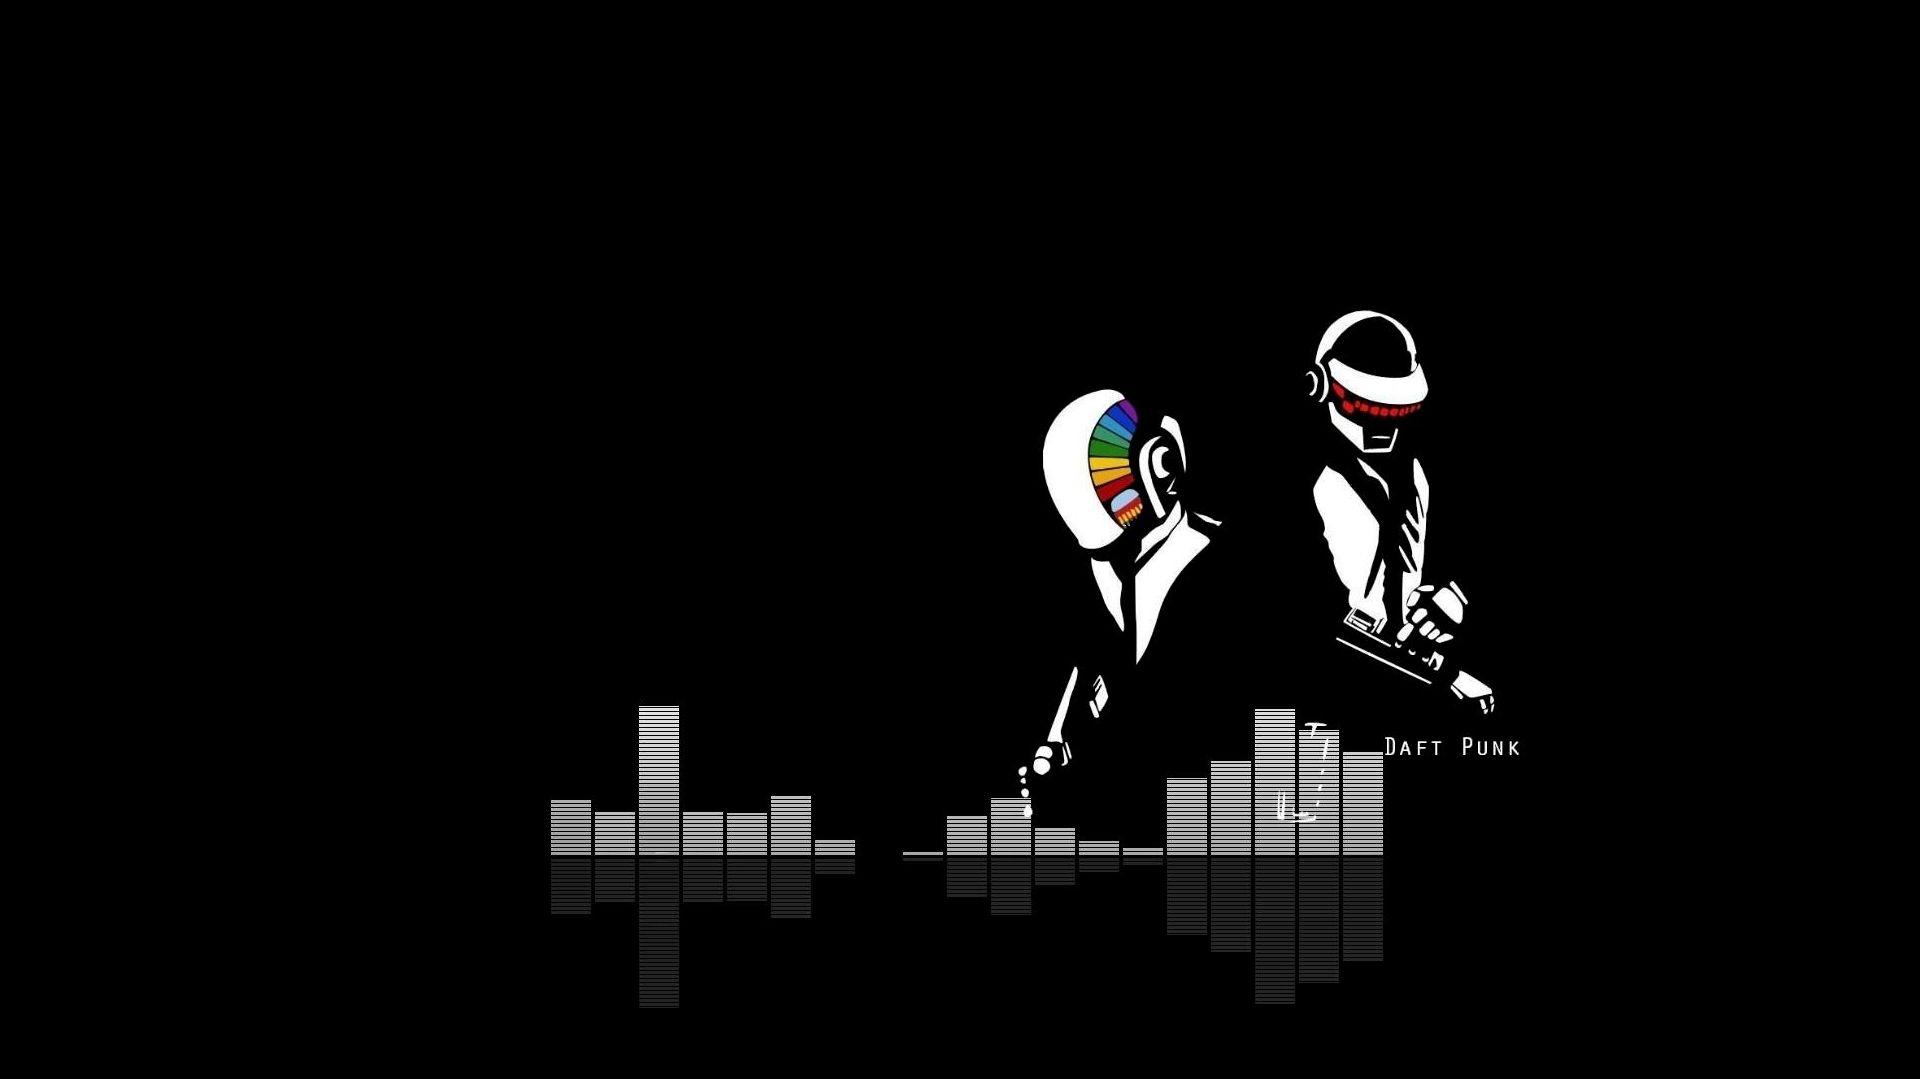 HDQ Cover Daft Punk Image Collection for Desktop